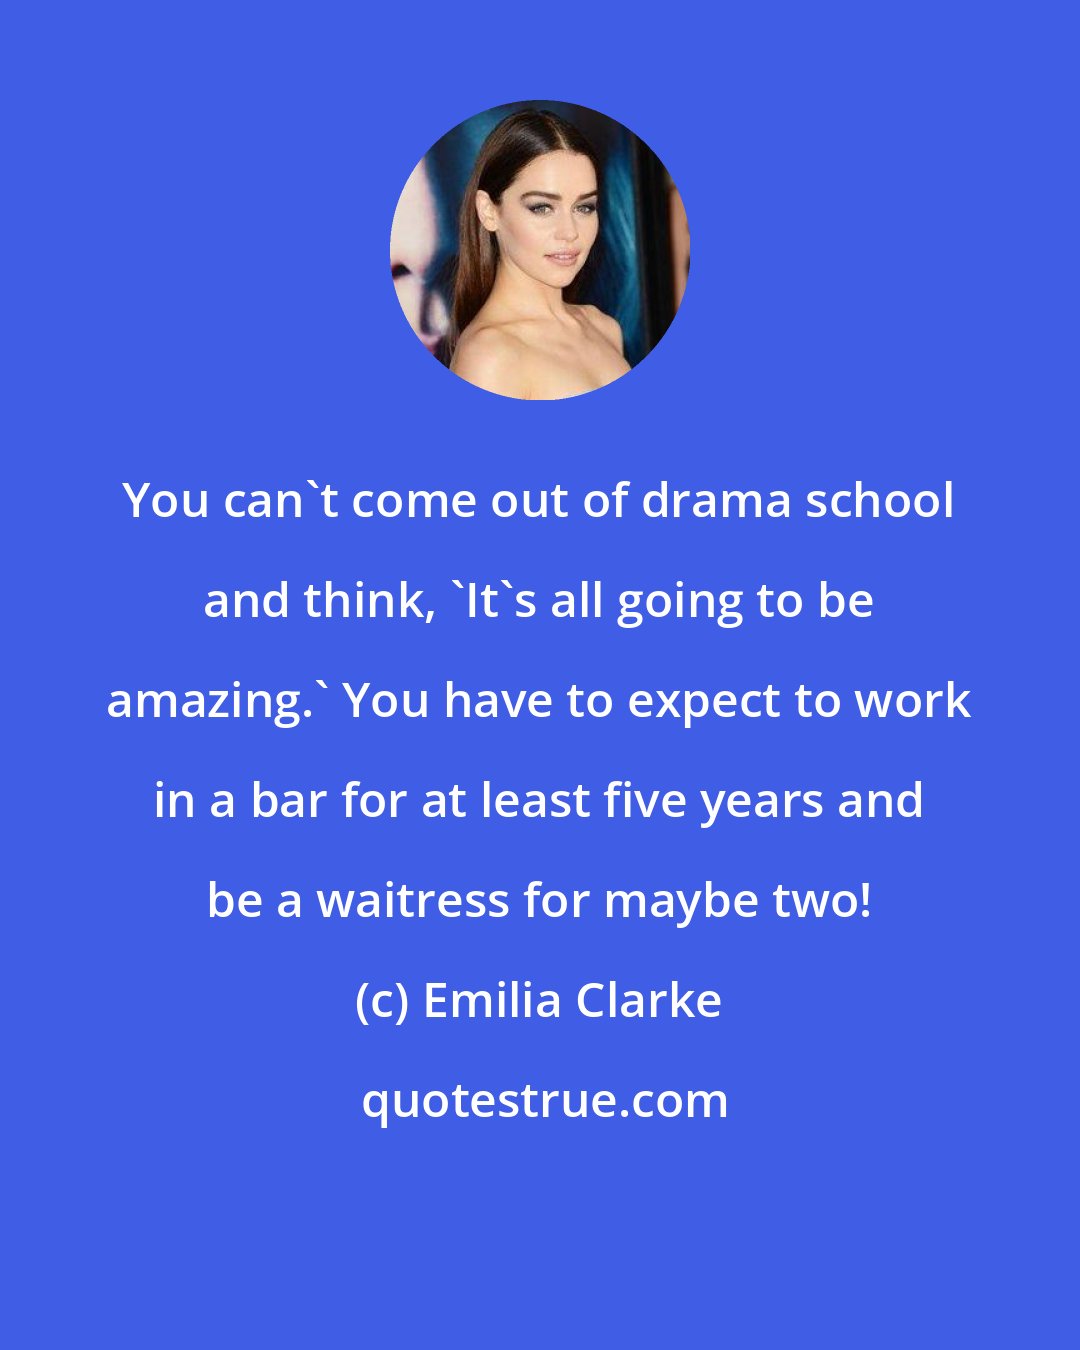 Emilia Clarke: You can't come out of drama school and think, 'It's all going to be amazing.' You have to expect to work in a bar for at least five years and be a waitress for maybe two!